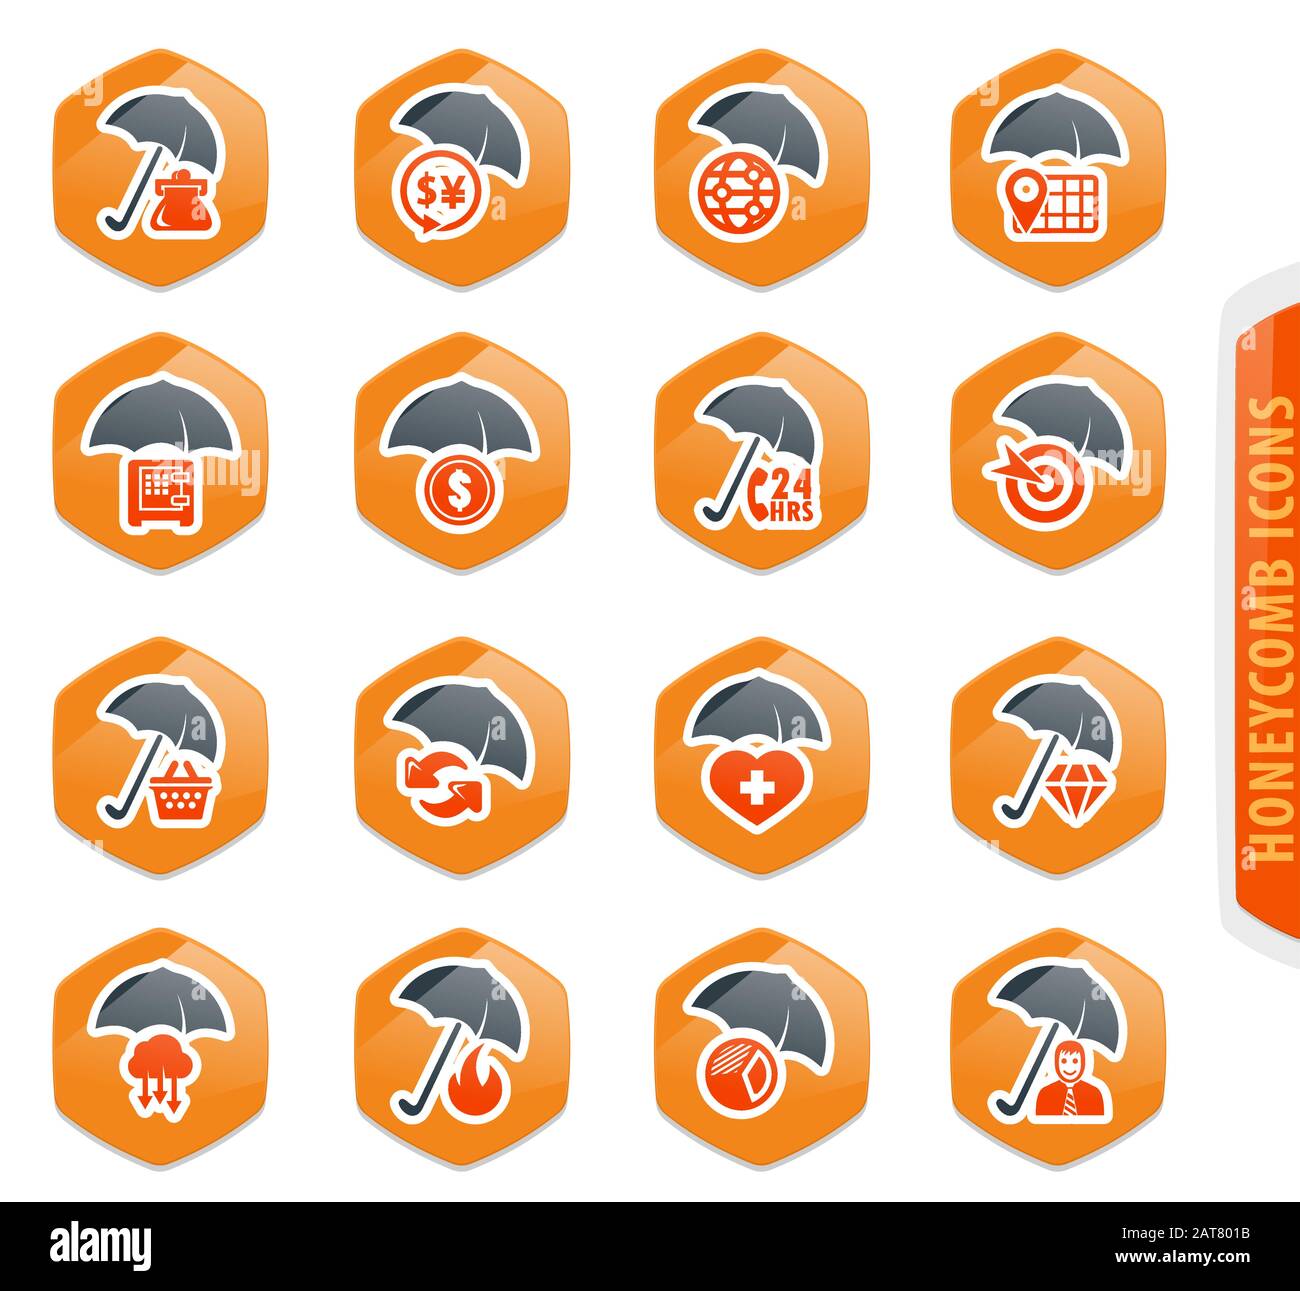 Insurance icons set Stock Vector